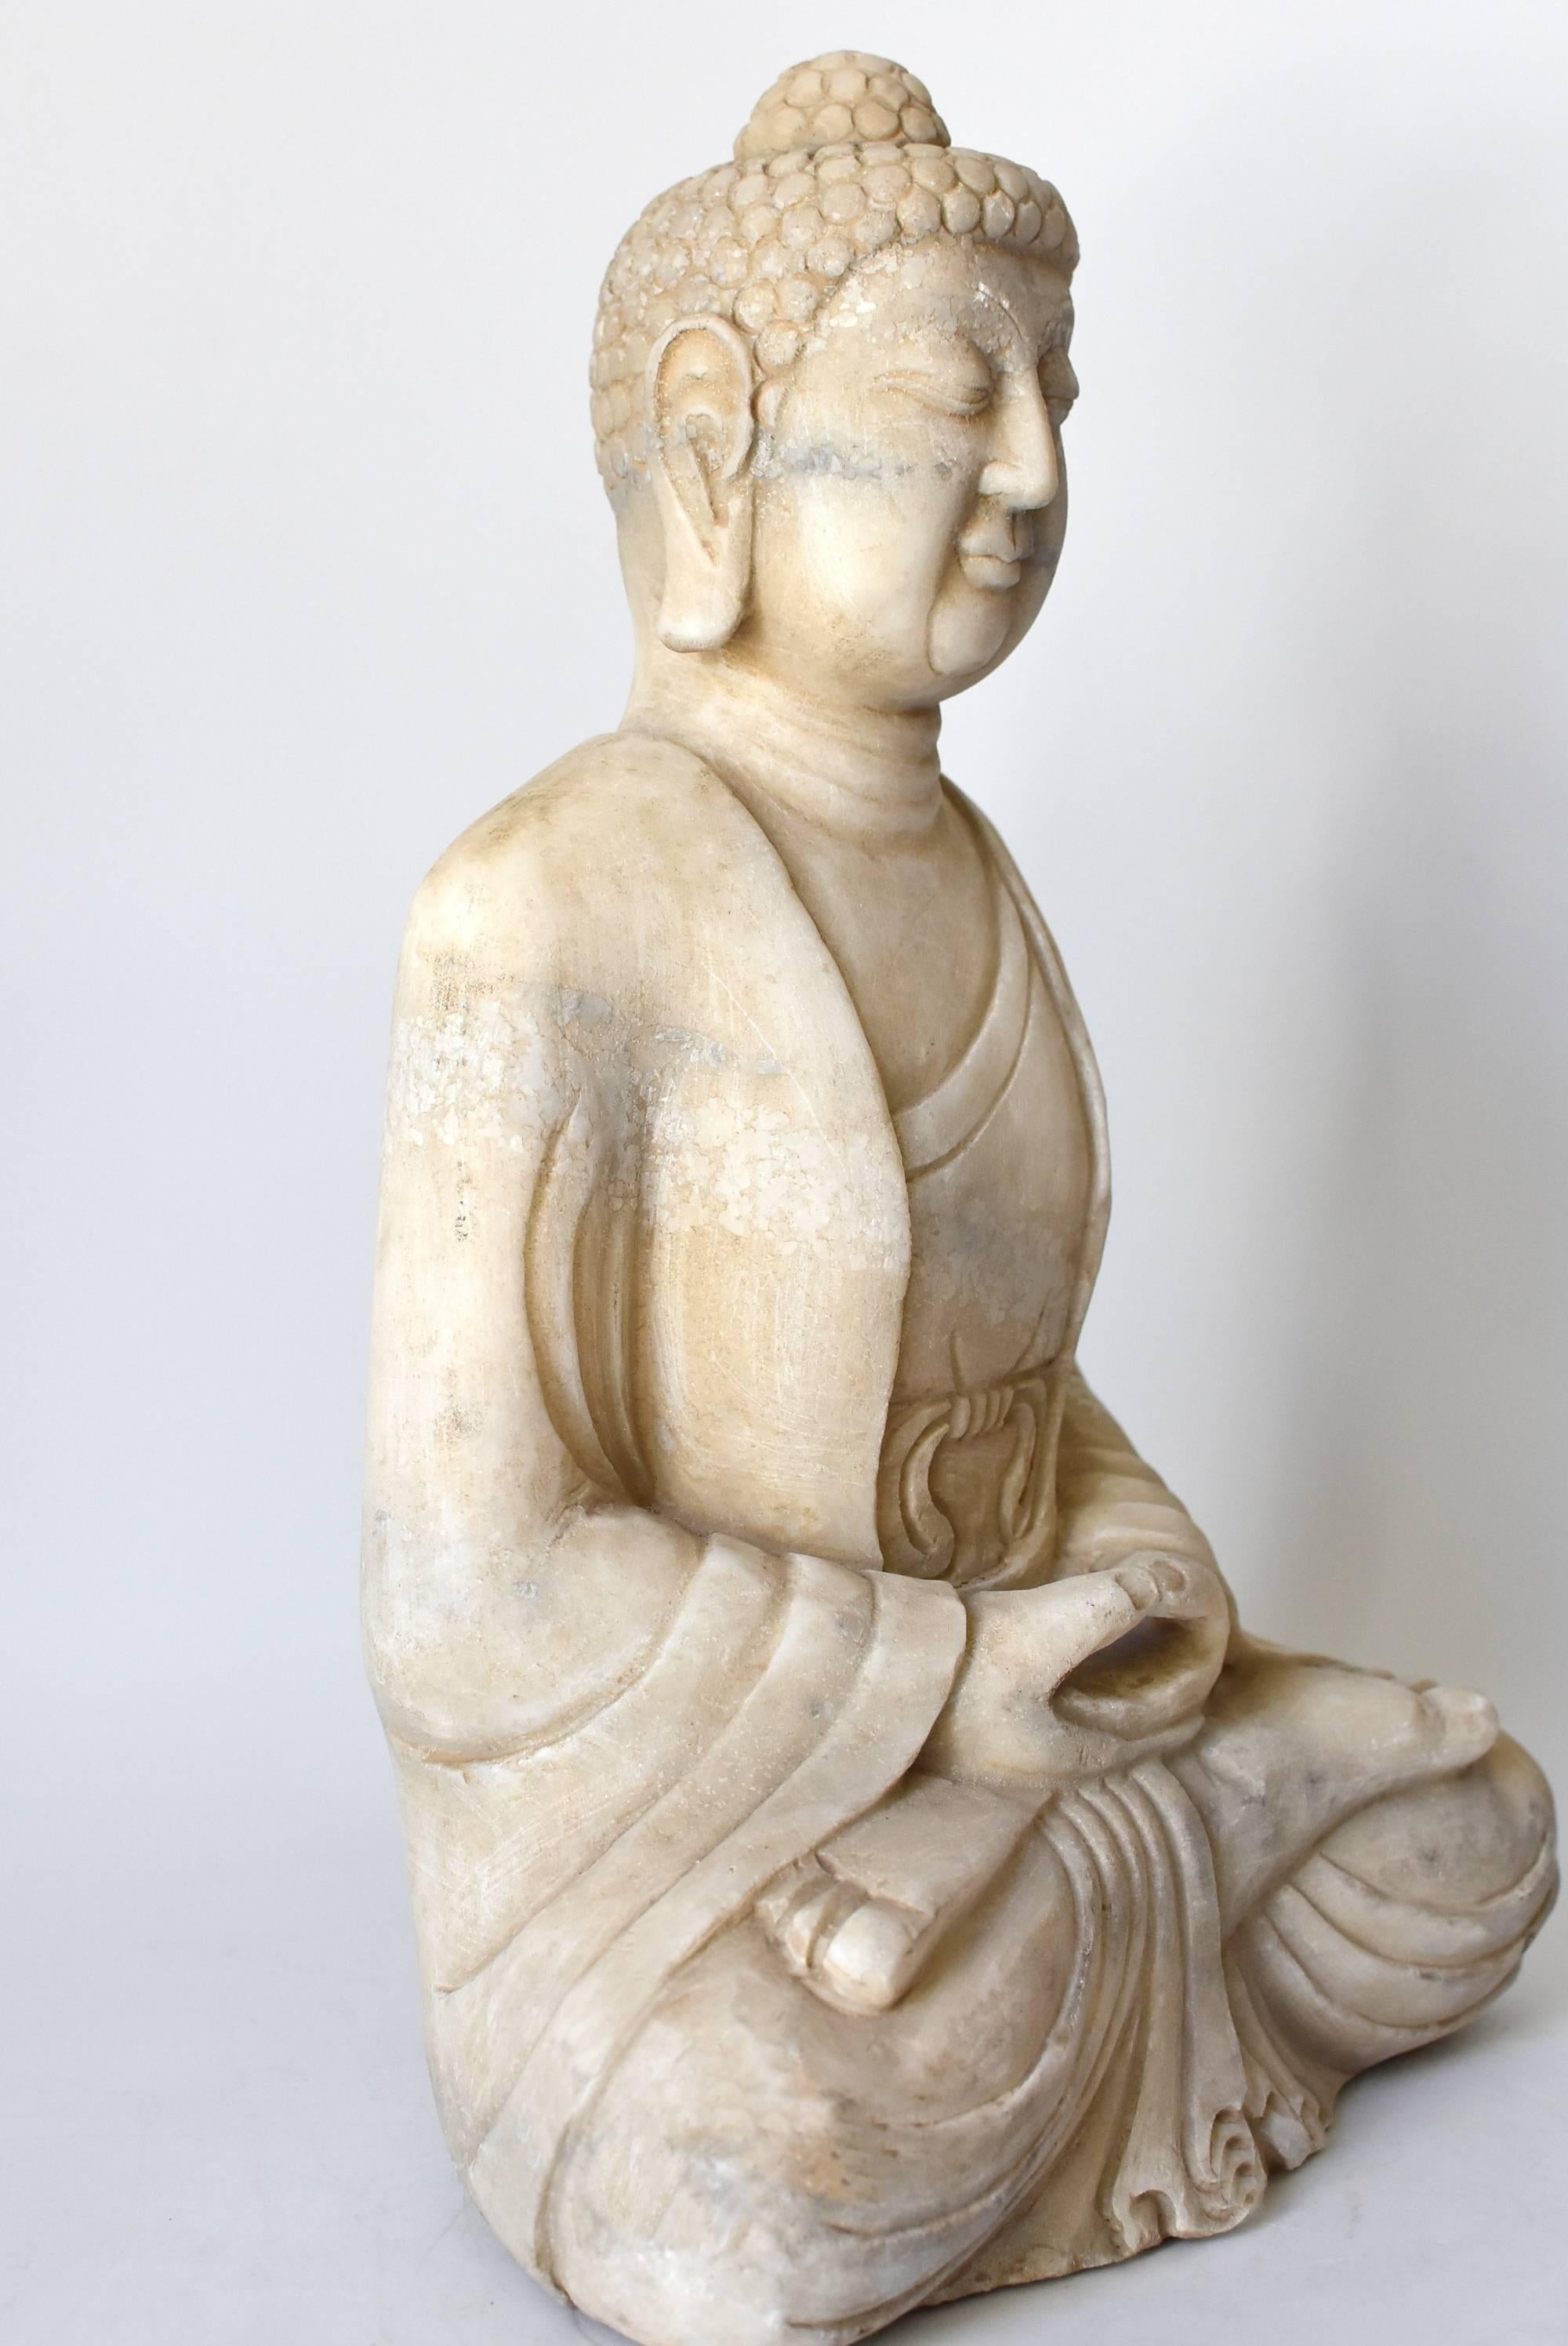 A beautiful Buddha statue hand-carved from solid marble. His facial expression and robe are well defined. Large earlobes and full face are features of Tang dynasty style. Buddha's special mudra with his fingers forming a circle expresses uniting the